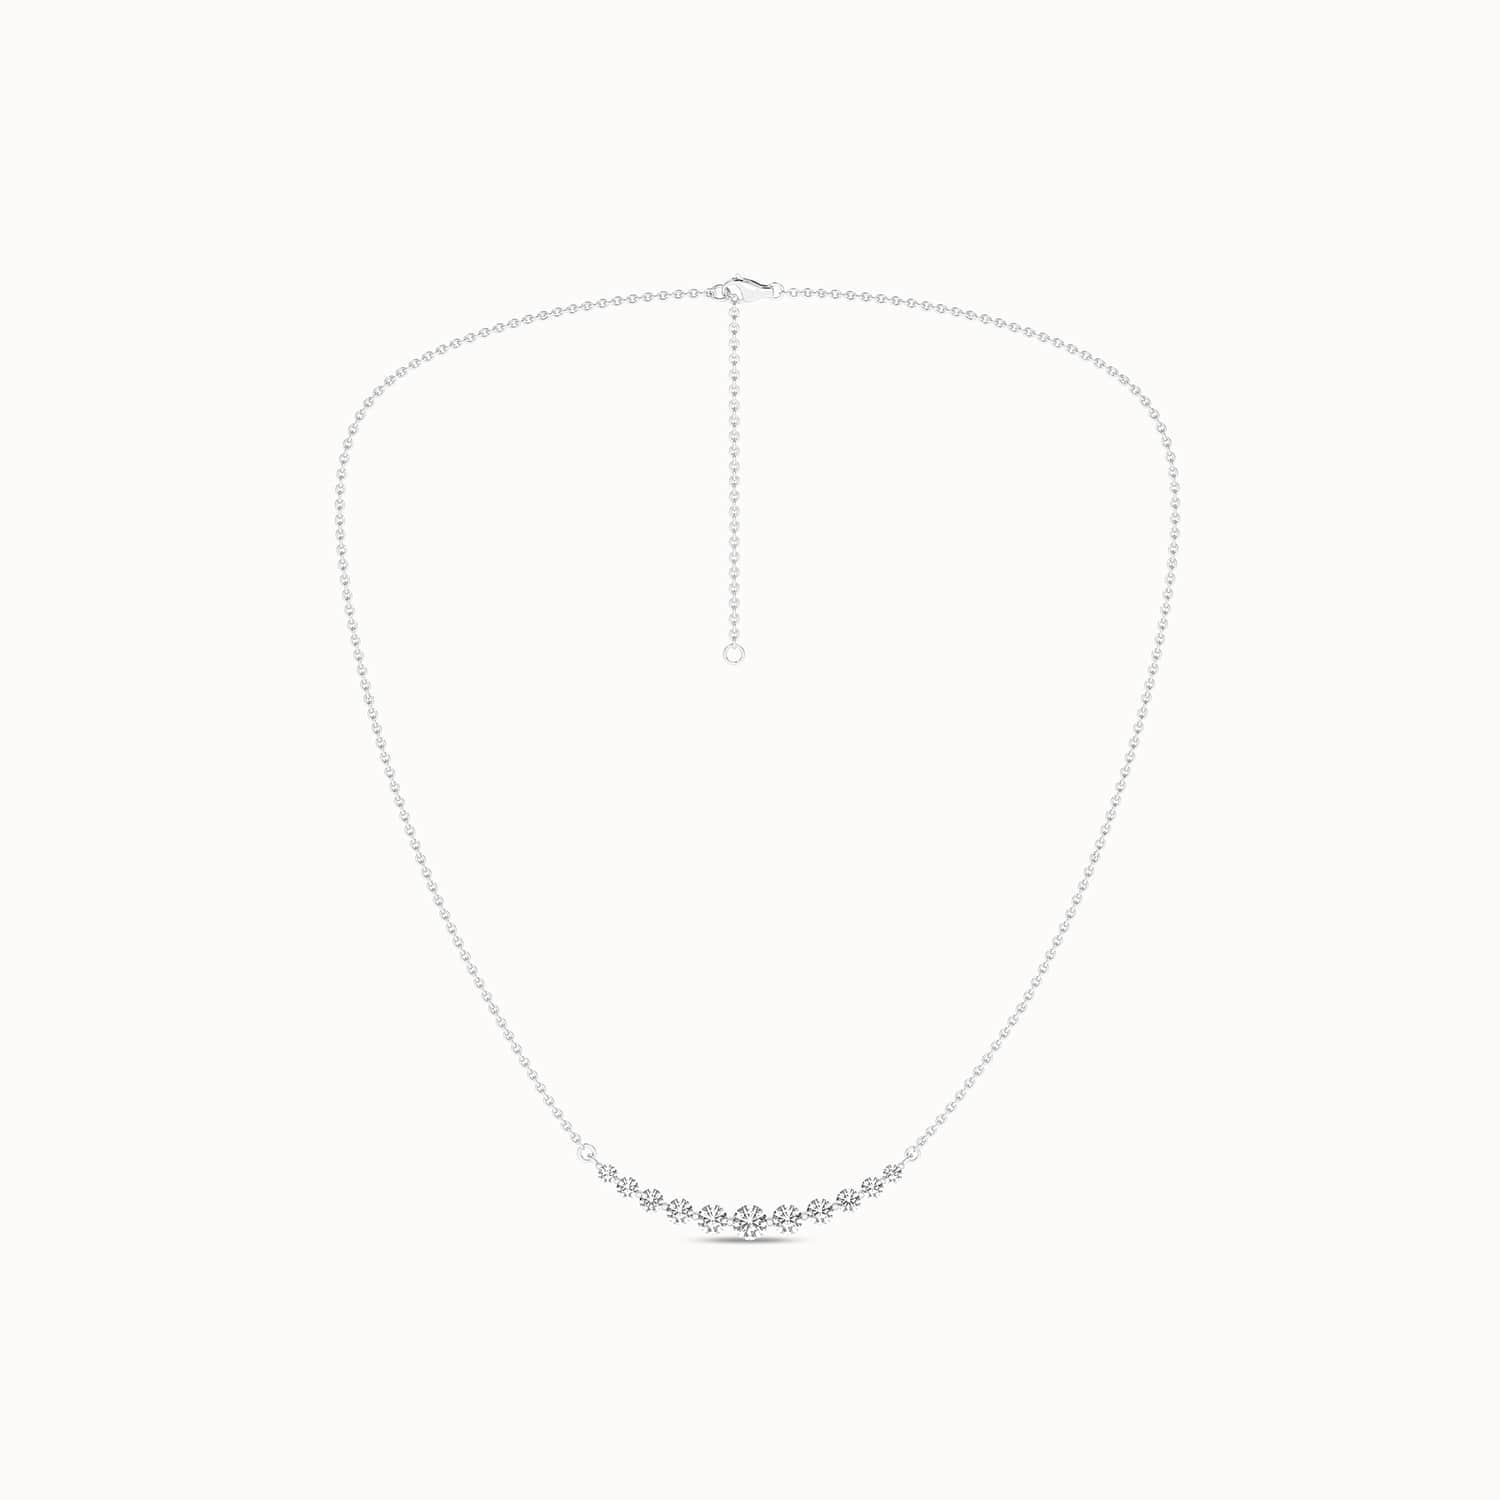 Captivating Necklace_Product Angle_1/2Ct. - 2